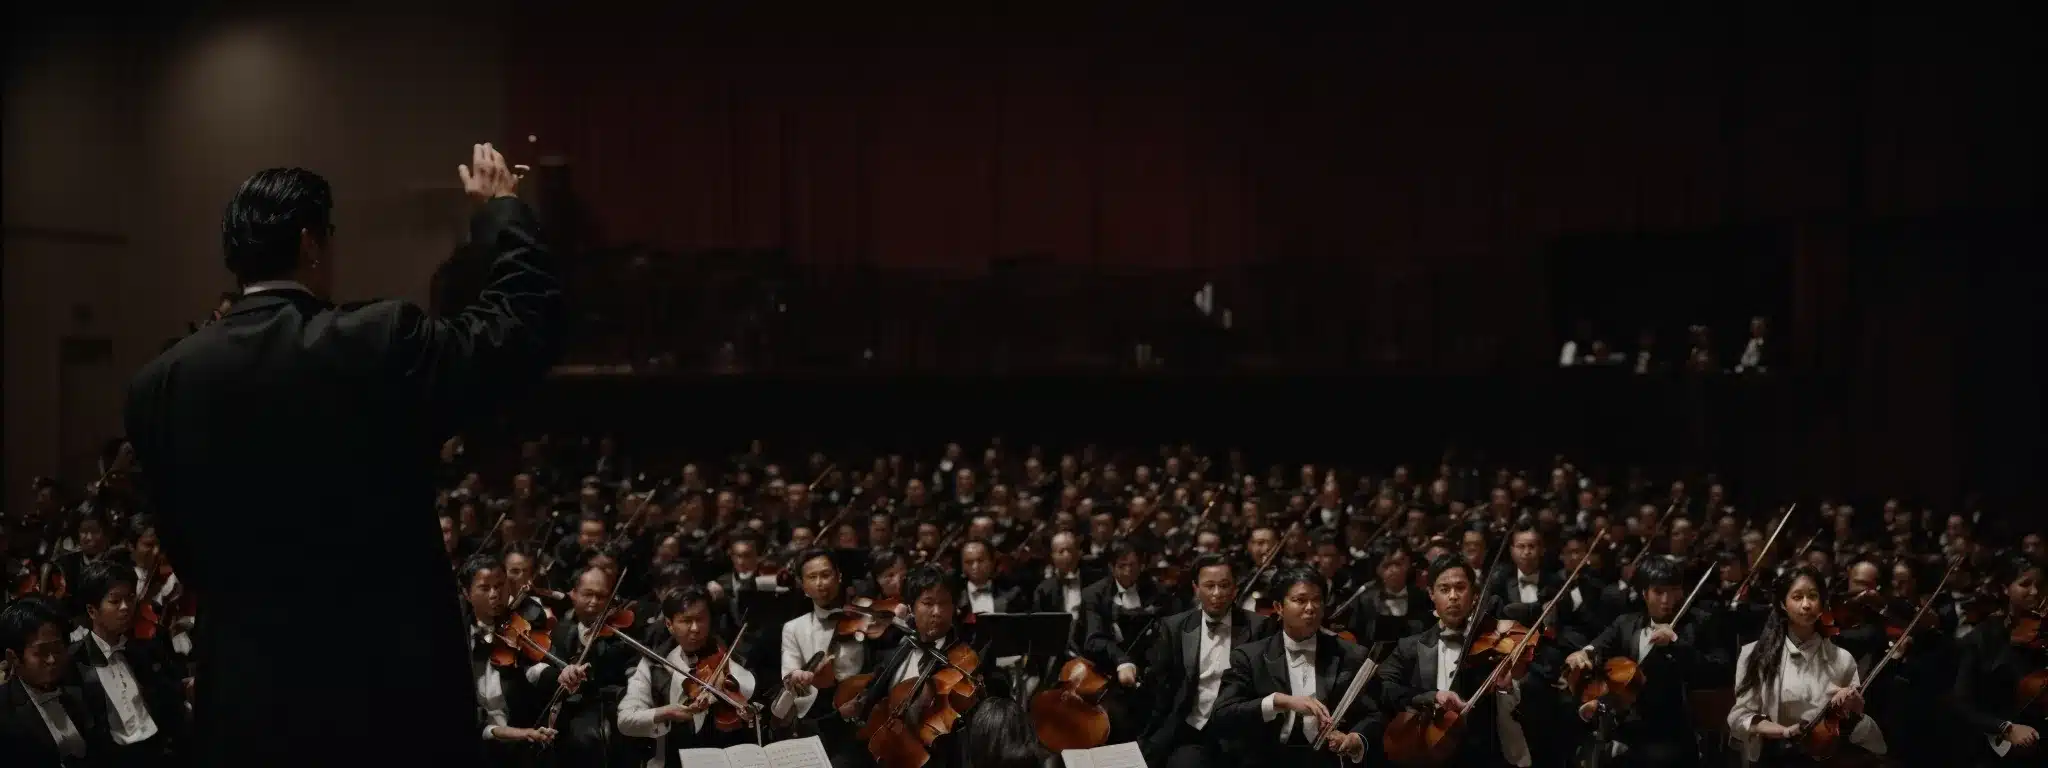 A Maestro Conducting An Orchestra On Stage In Front Of An Attentive Audience.